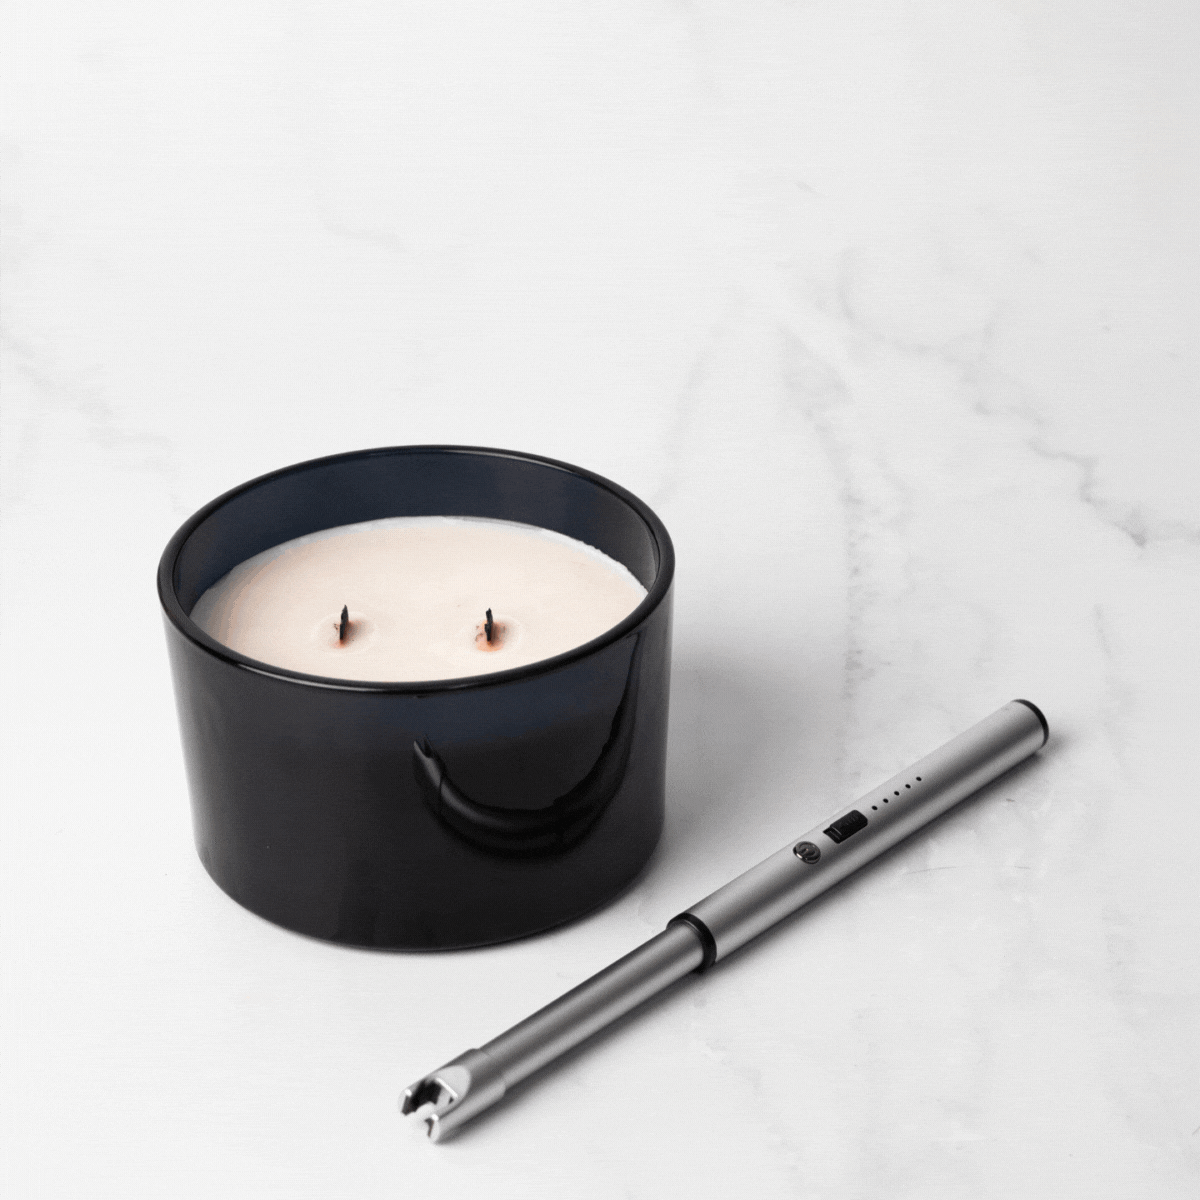 USB Rechargeable Candle and Incense Lighter - Silver laser Lighter pictured lighting twin wick candle - Stocked at LOVINLIFE Co Byron Bay for all your gifts, candles, homewares and interior decorating needs